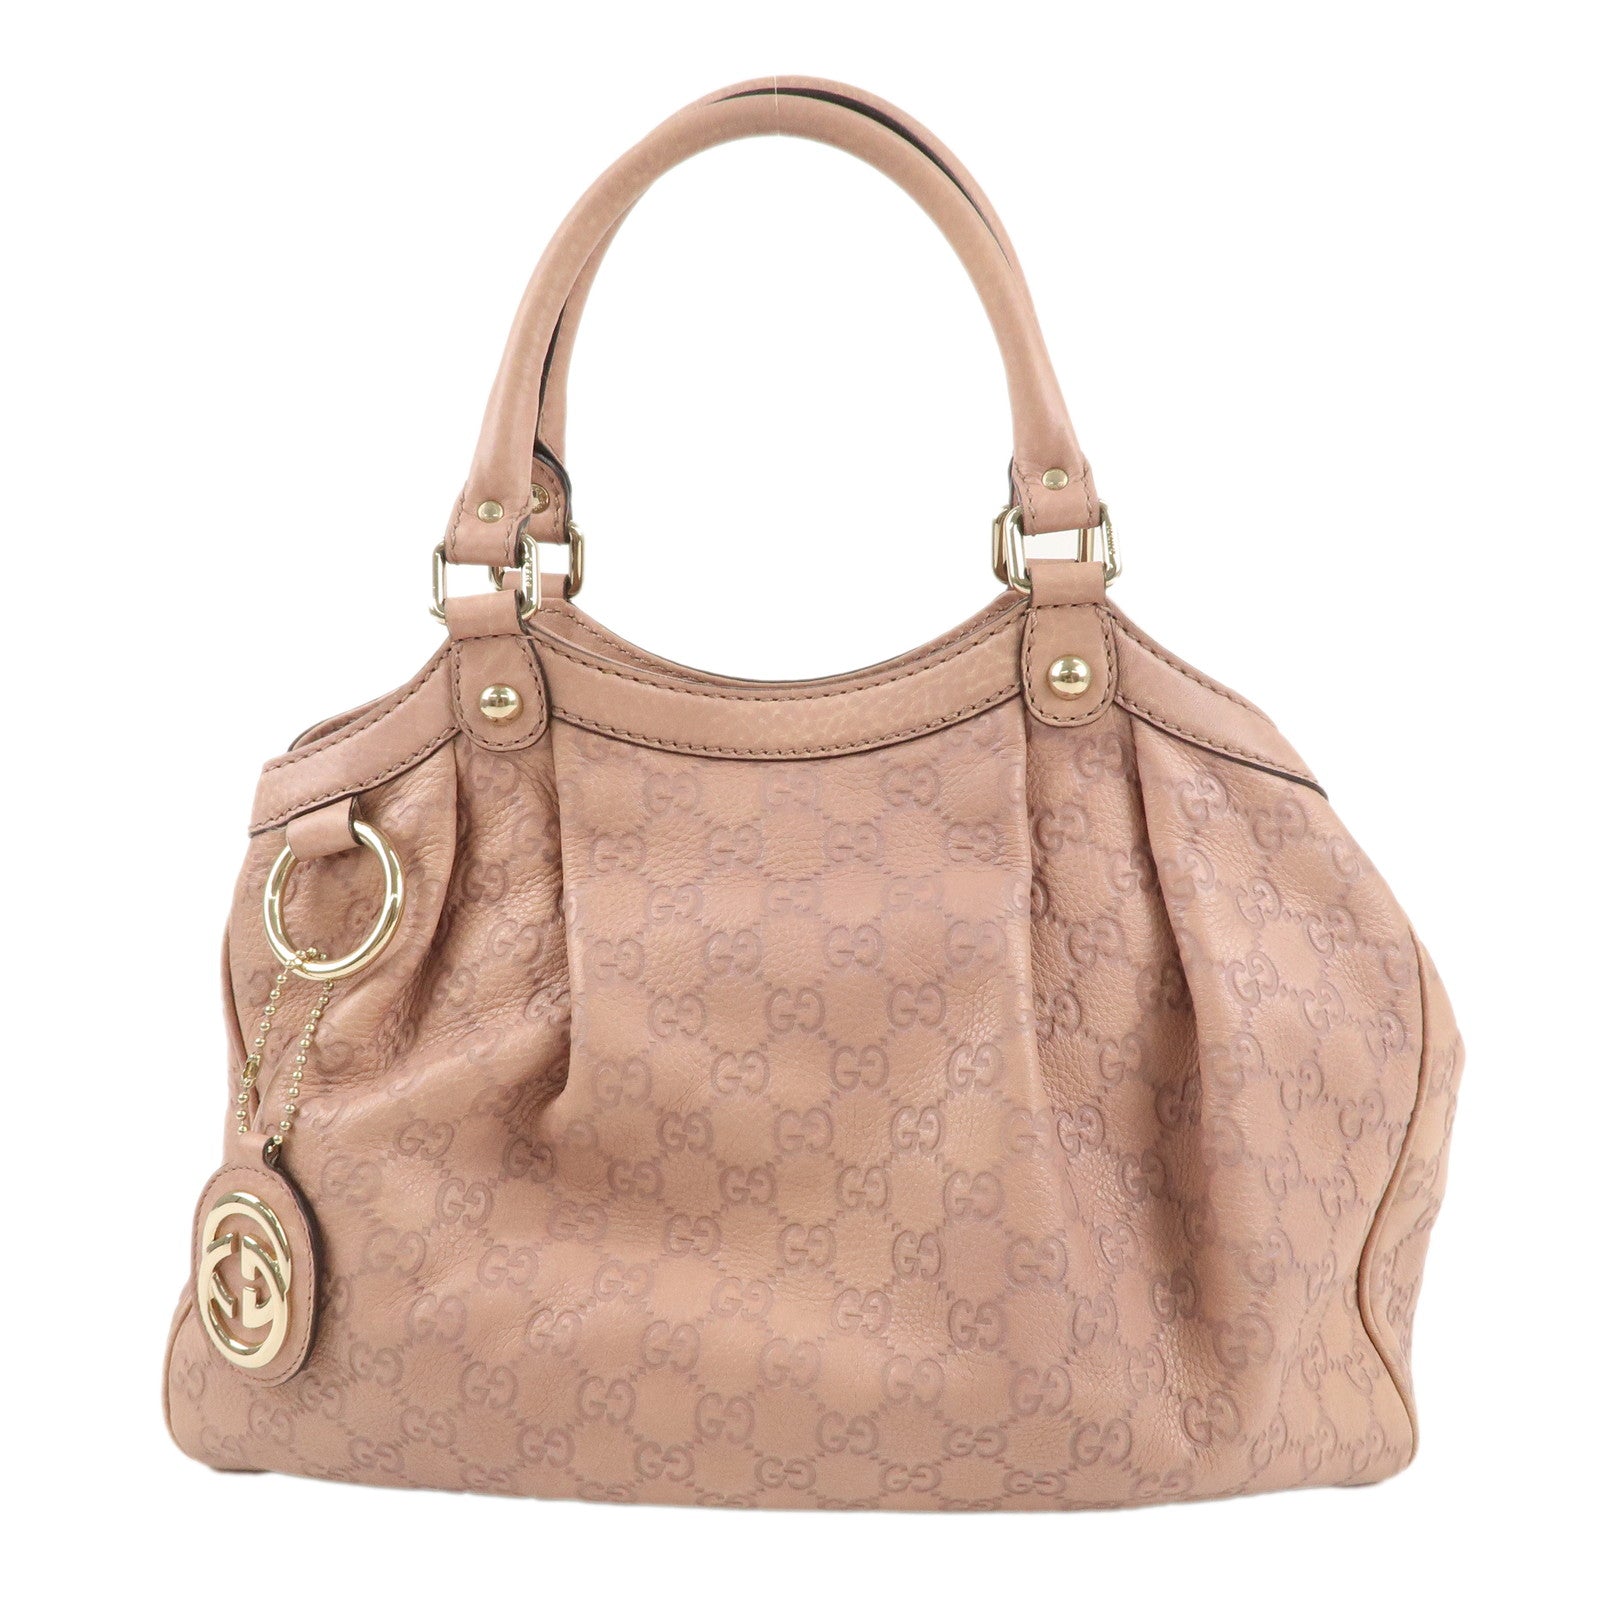 GUCCI-Sukey-Guccissima-Leather-Tote-Bag-Hand-Bag-Pink-211944